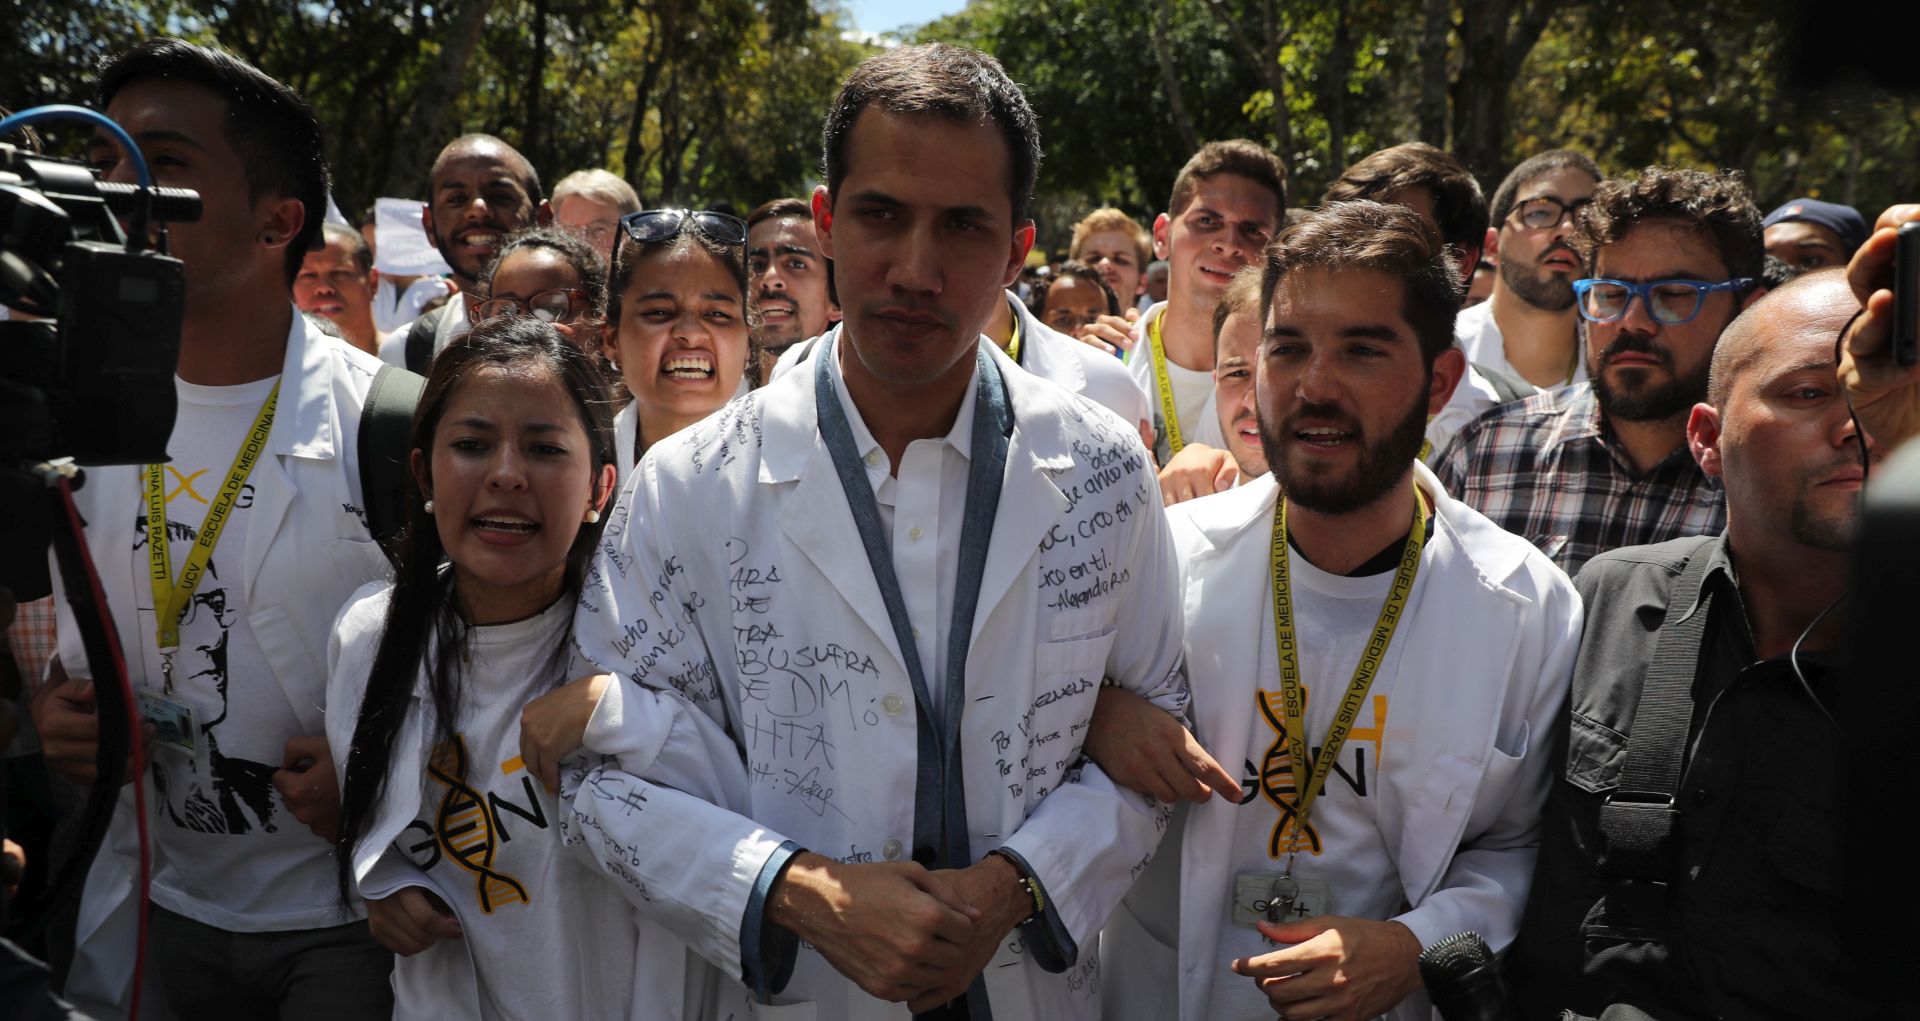 epa07332054 President of the Venezuelan National Assembly Juan Guaido (C) participates in an opposition demonstration in Caracas, Venezuela, 30 January 2019. National Assembly leader Juan Guaido declared himself interim president of Venezuela on 23 January and promised to guide the country toward new election as he consider last May's election not valid.  EPA/Miguel Gutiérrez